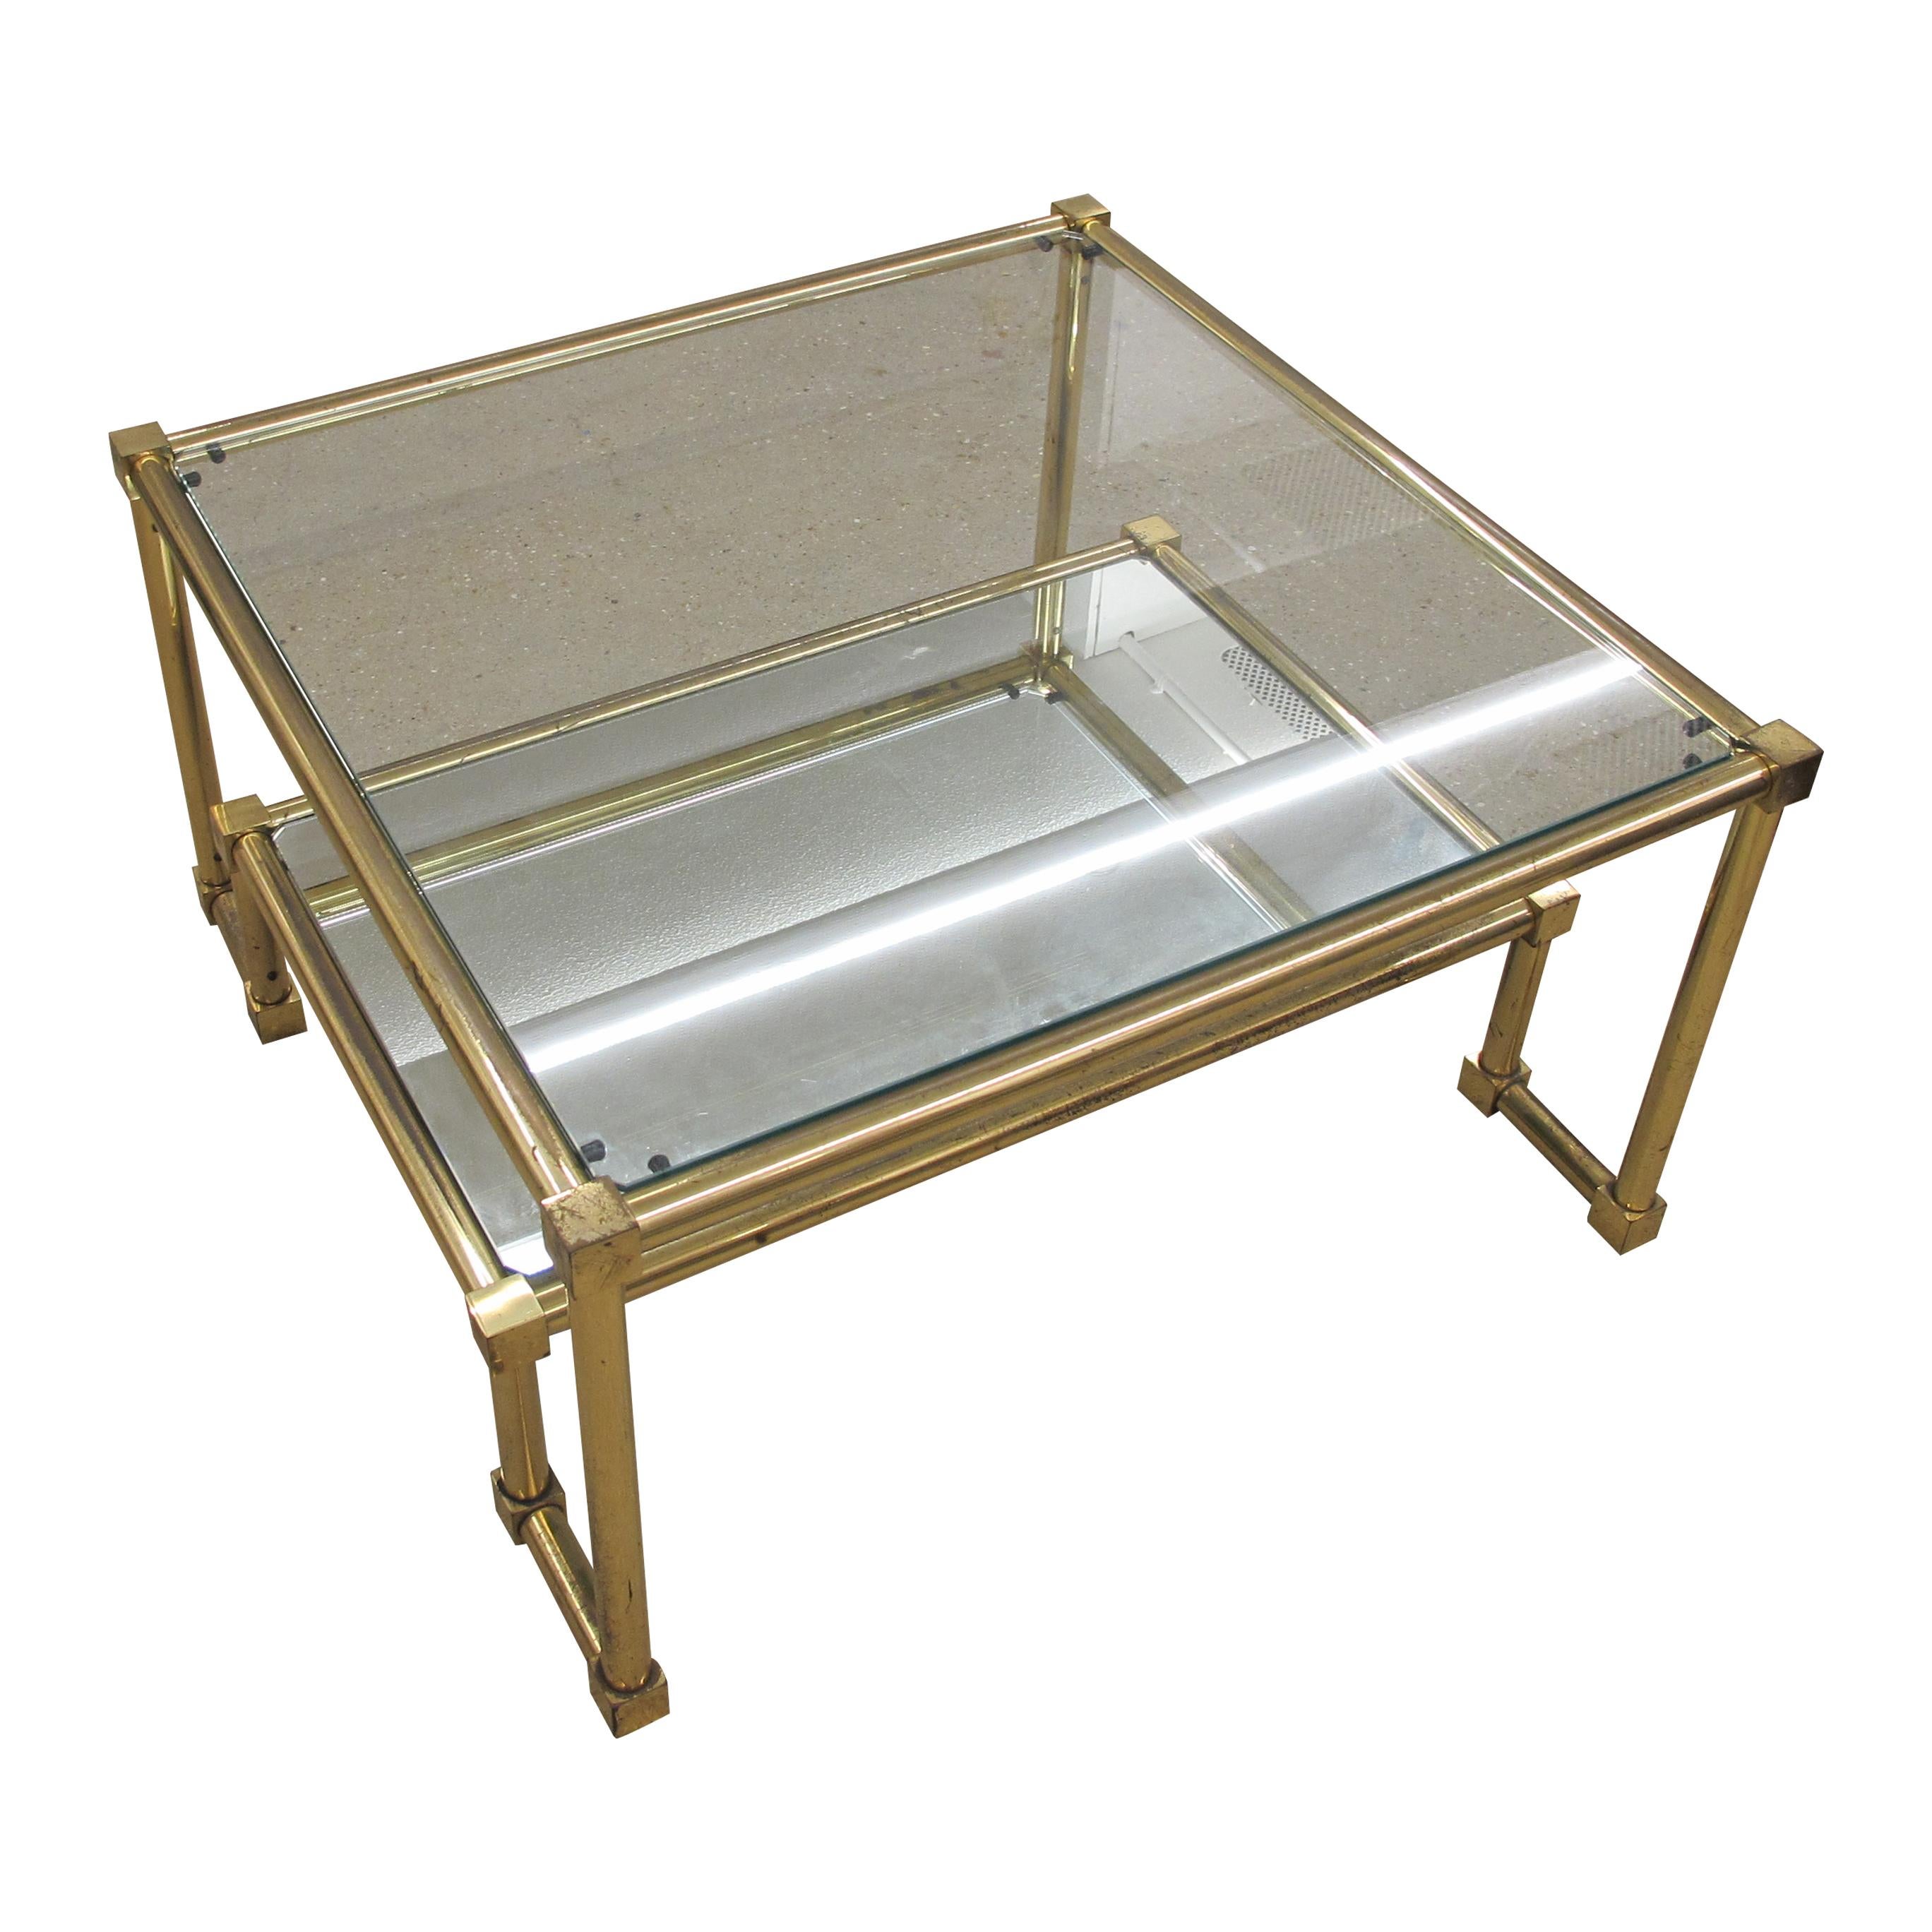 1970s Pair of Two Tiers Square Brass and Glass Structural Coffee tables, French In Good Condition For Sale In London, GB